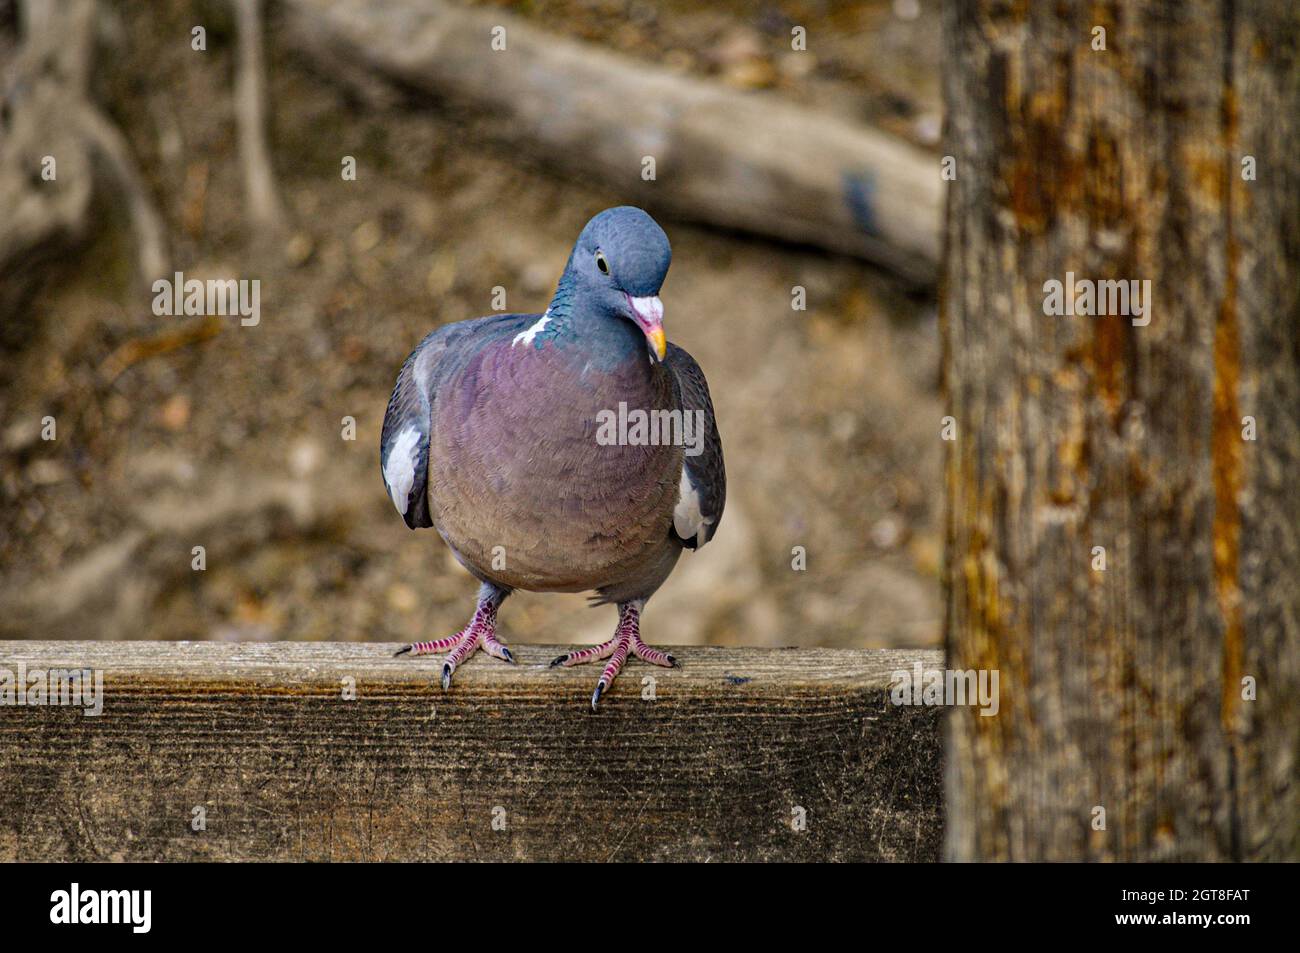 Close-up Of Pigeon Perching On Wood Stock Photo